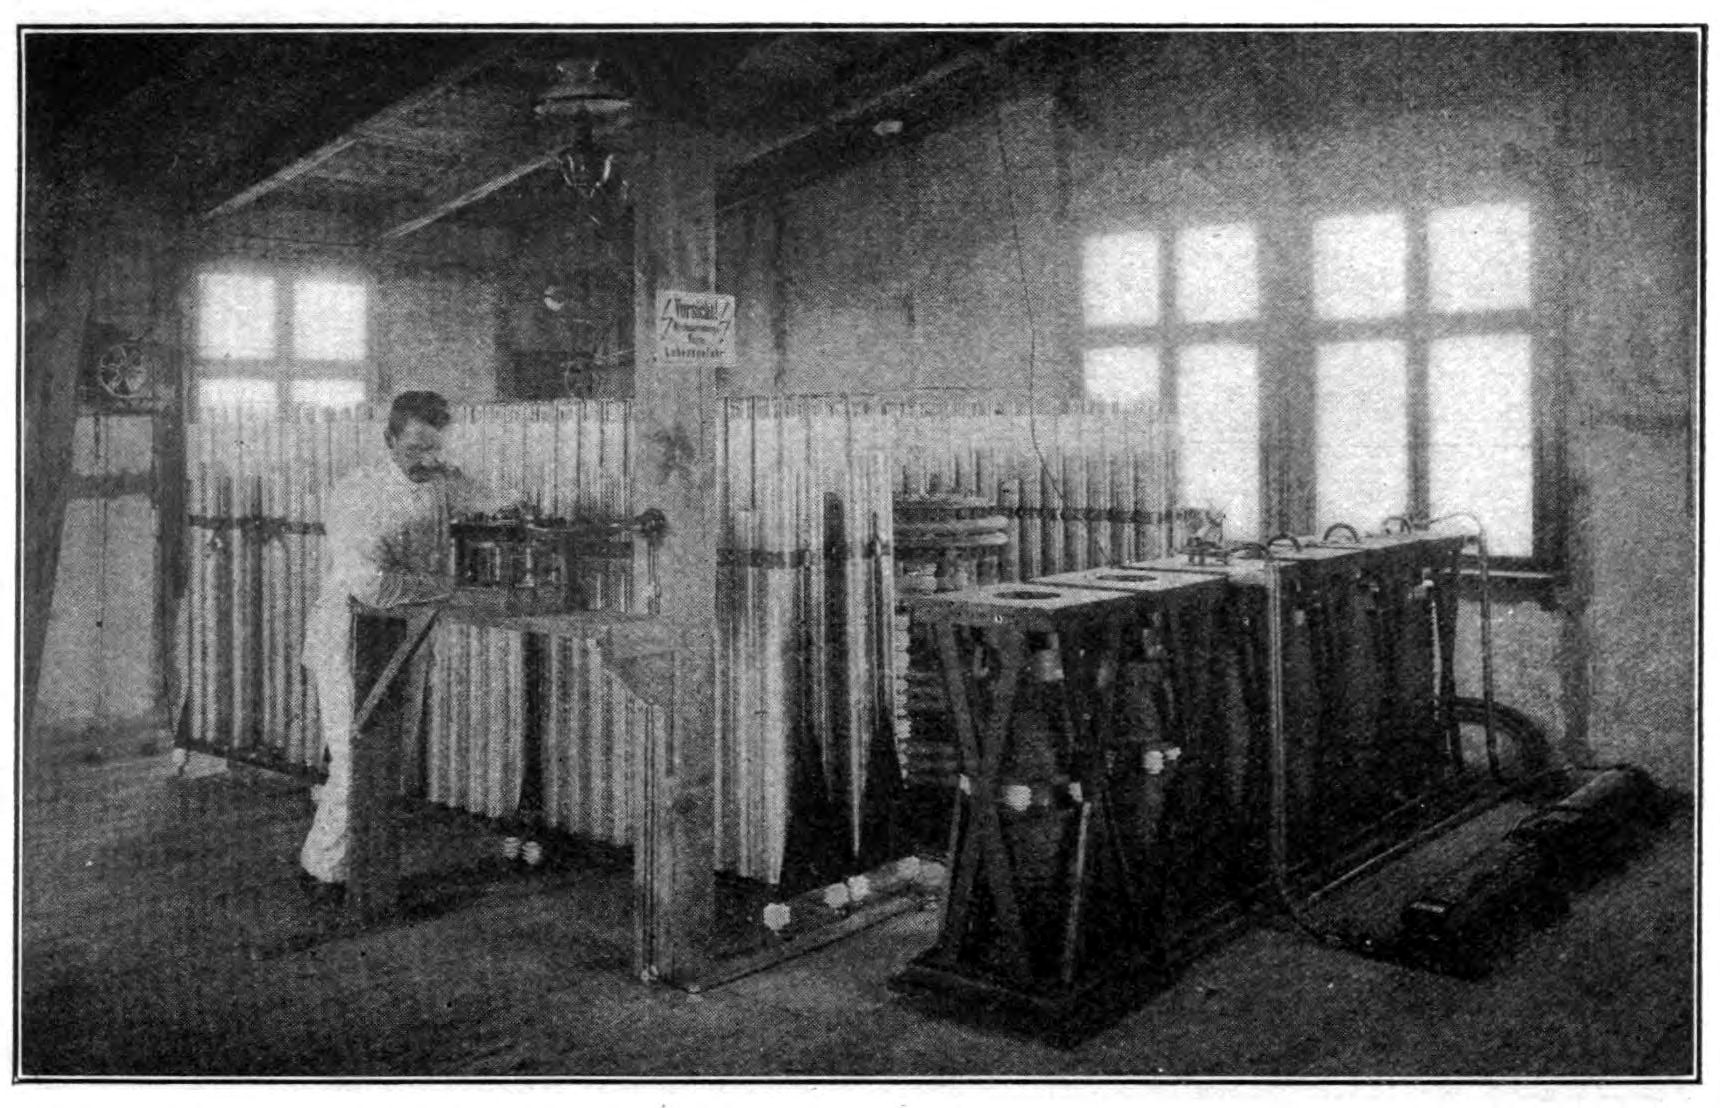 FIG. 116.—Transmitting equipment of the high power station at Nauen, twenty-five miles northwest of Berlin, Germany, showing six induction coils (in the foreground) arranged to charge the Leyden jars (composed of 360 units).